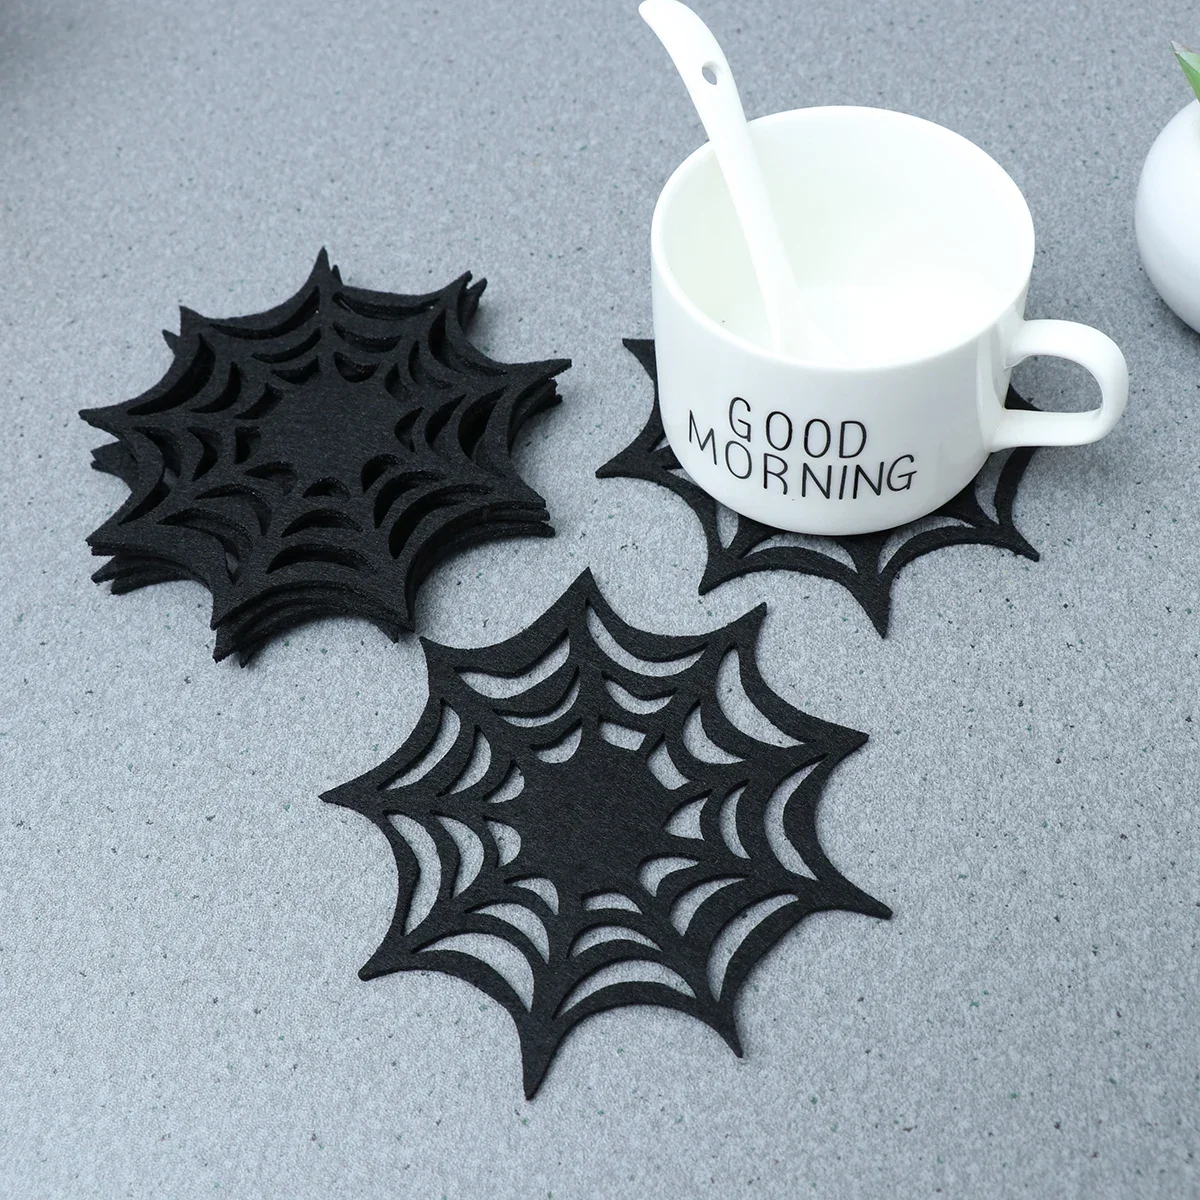 

Halloween Placemats Coasters Spider Web Table Halloweens Placemat Set Of Horror Drink Mat Doilies Supplies Decor For Black Goth